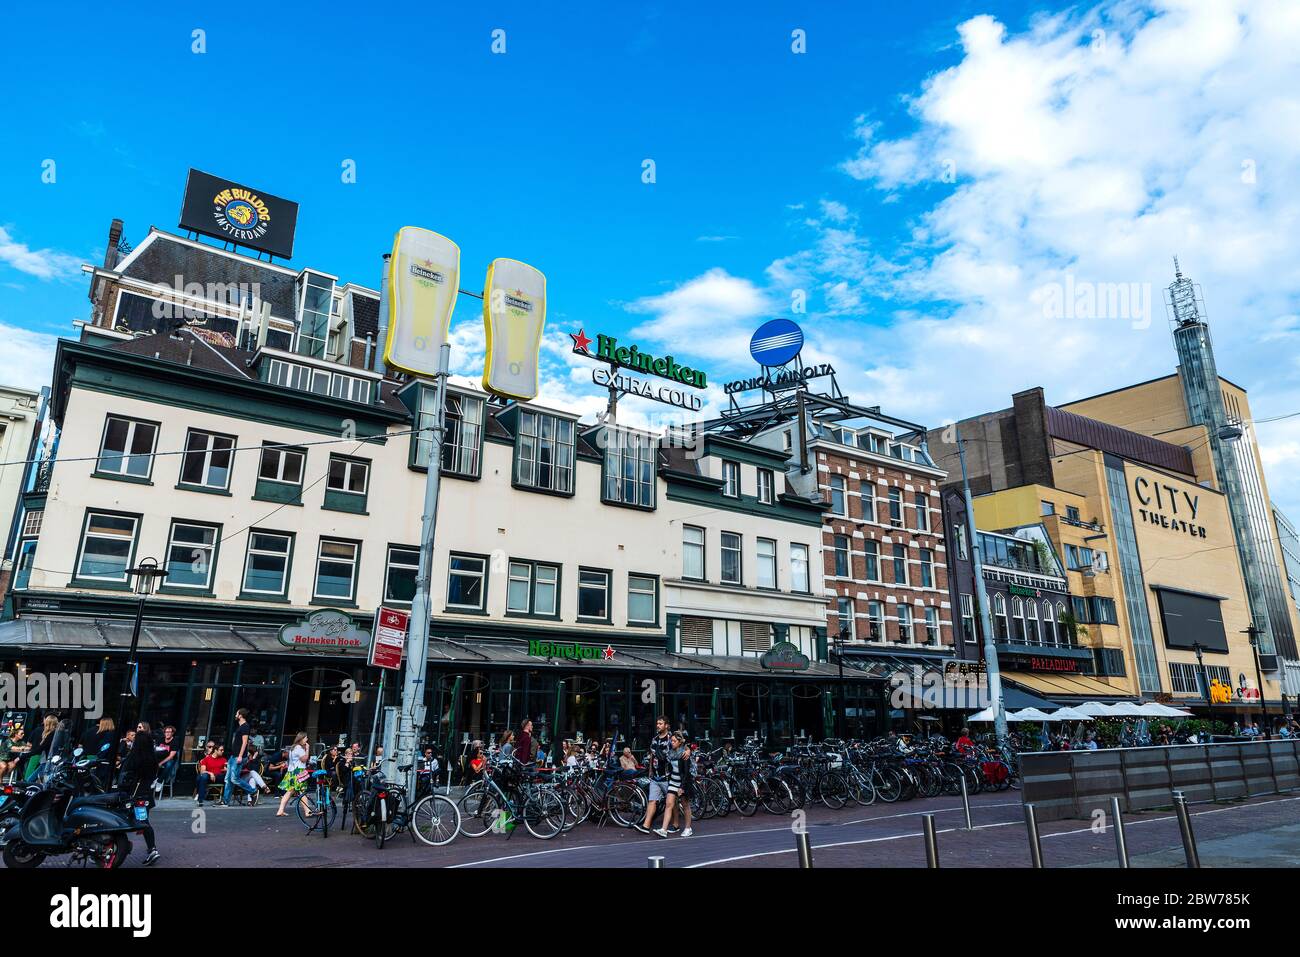 Amsterdam, Netherlands - September 9, 2018: Street with people on the bar terraces and Heineken sign in Amsterdam, Netherlands Stock Photo